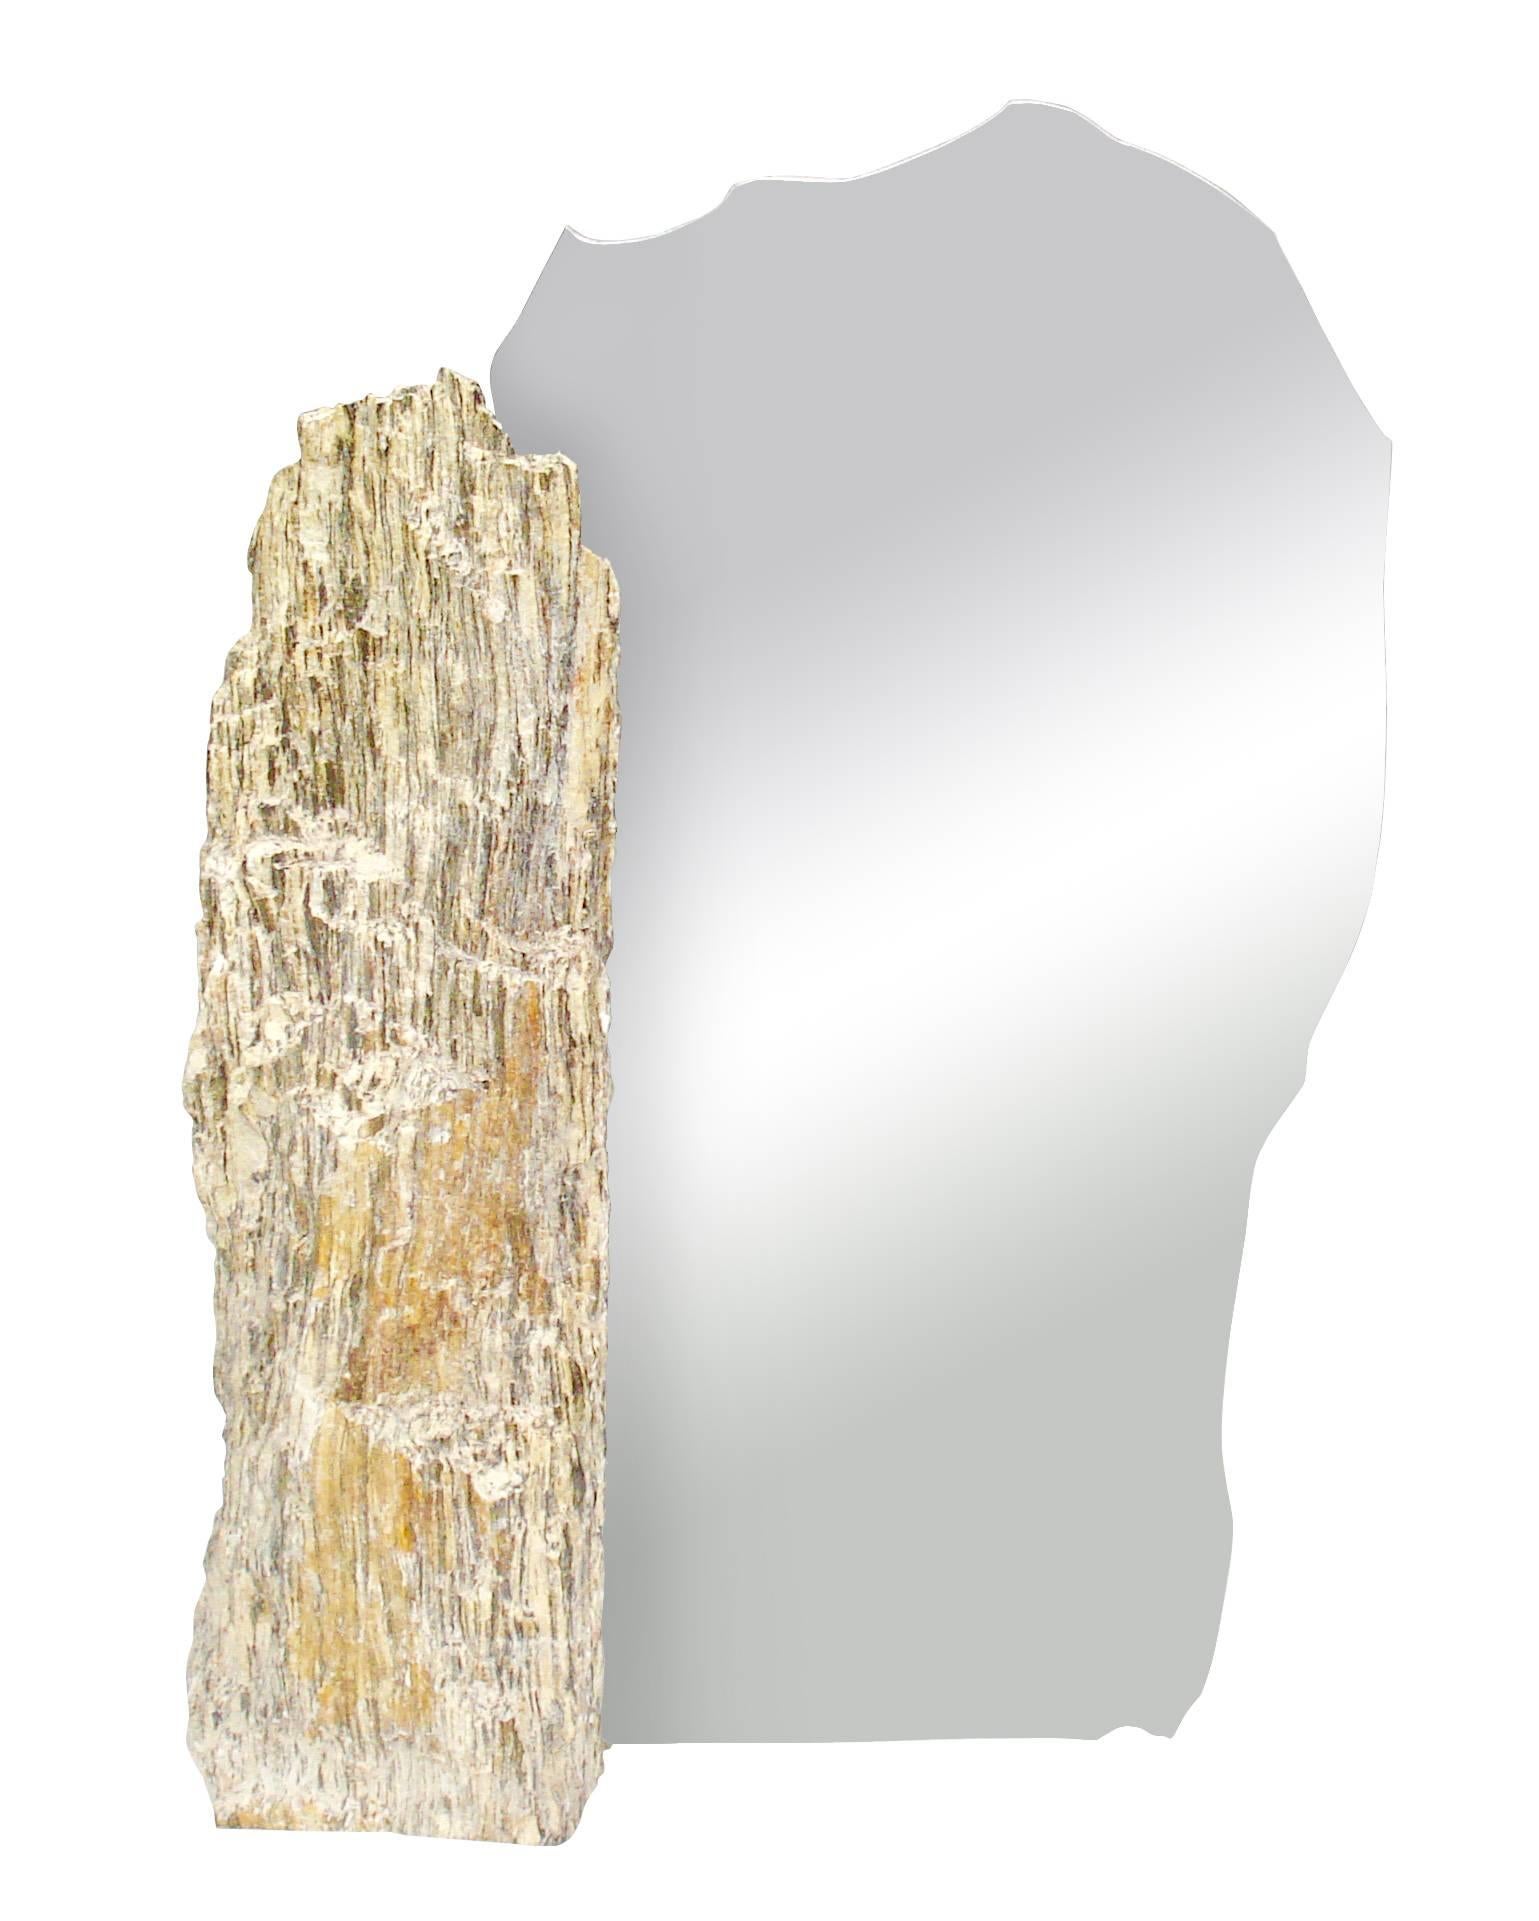 Dancing Ballerina its exclusive sculpture-mirror excellent piece for high fashion boutiques or home. 

Fossil stone (wood stone) found on Europe Alpine areas its rich texture with changing colors and shades qualities. Dark, gold, silver shades